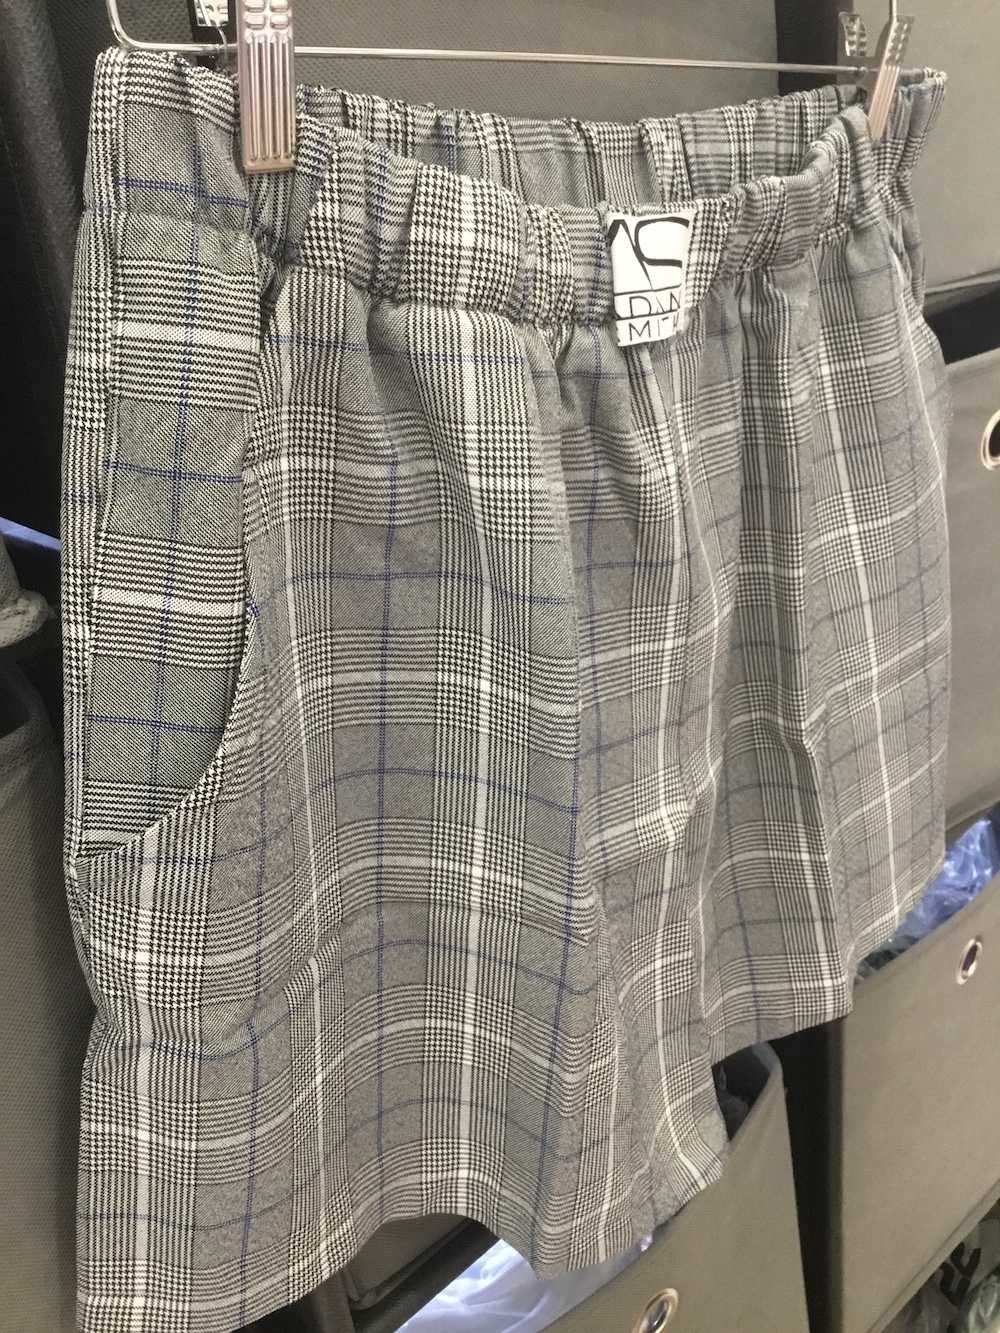 Adam Smith - Relax Shorts With Pocket - Plaid